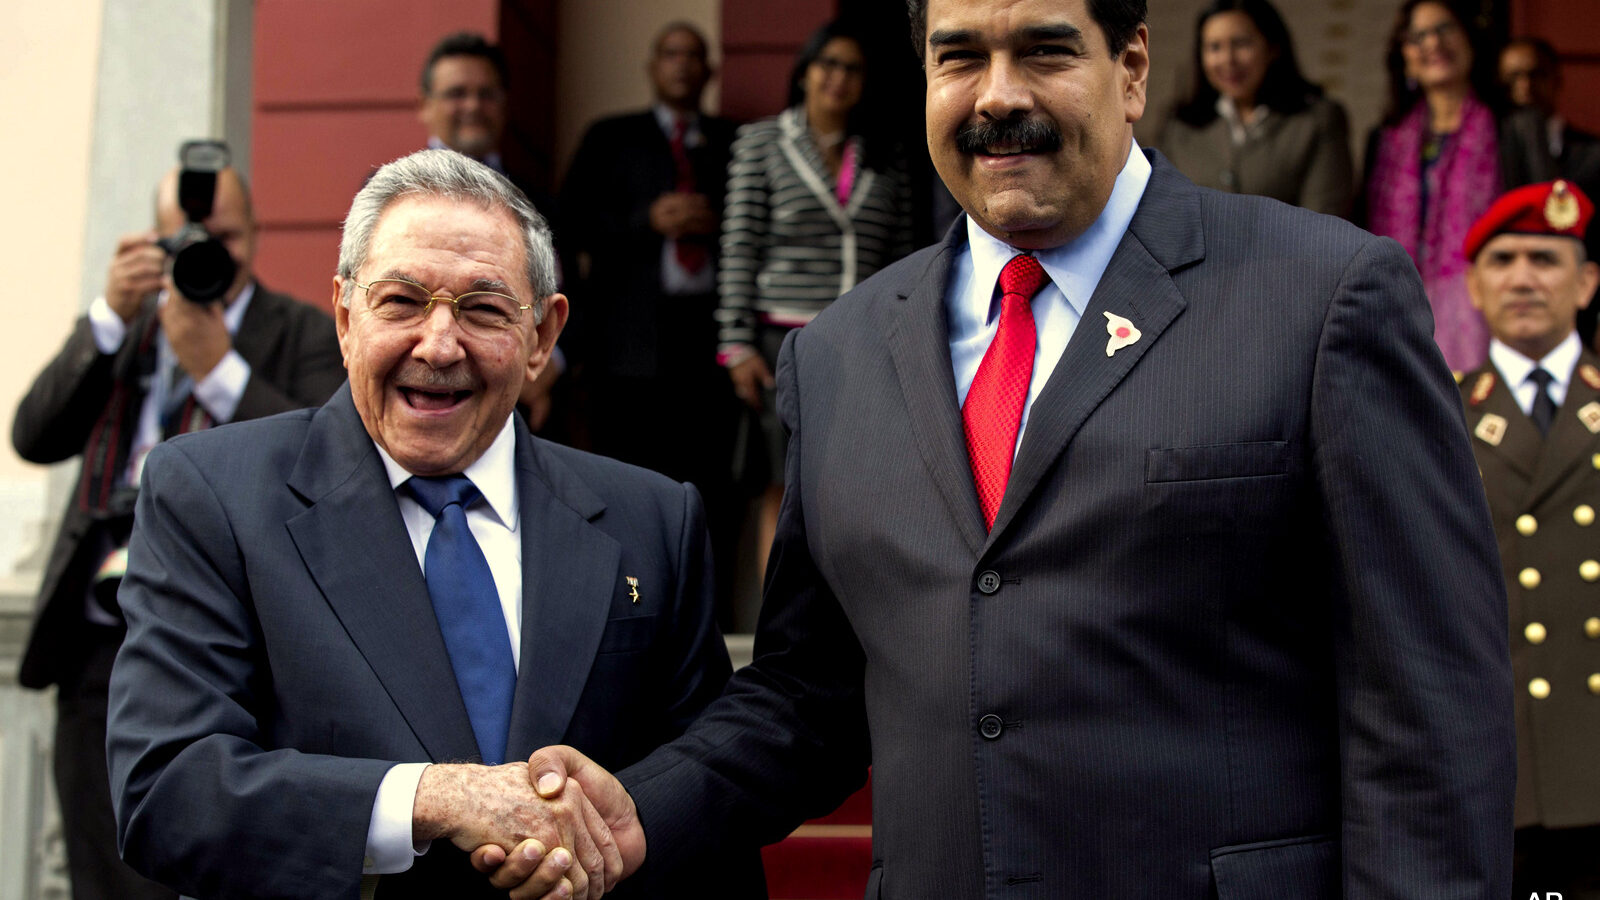 Cuba's President Raul Castro, left, shakes hands with Venezuela's President Nicolas Maduro in front of the press after arriving to Miraflores presidential palace for an emergency ALBA meeting in Caracas, Venezuela, Tuesday, March 17, 2015.